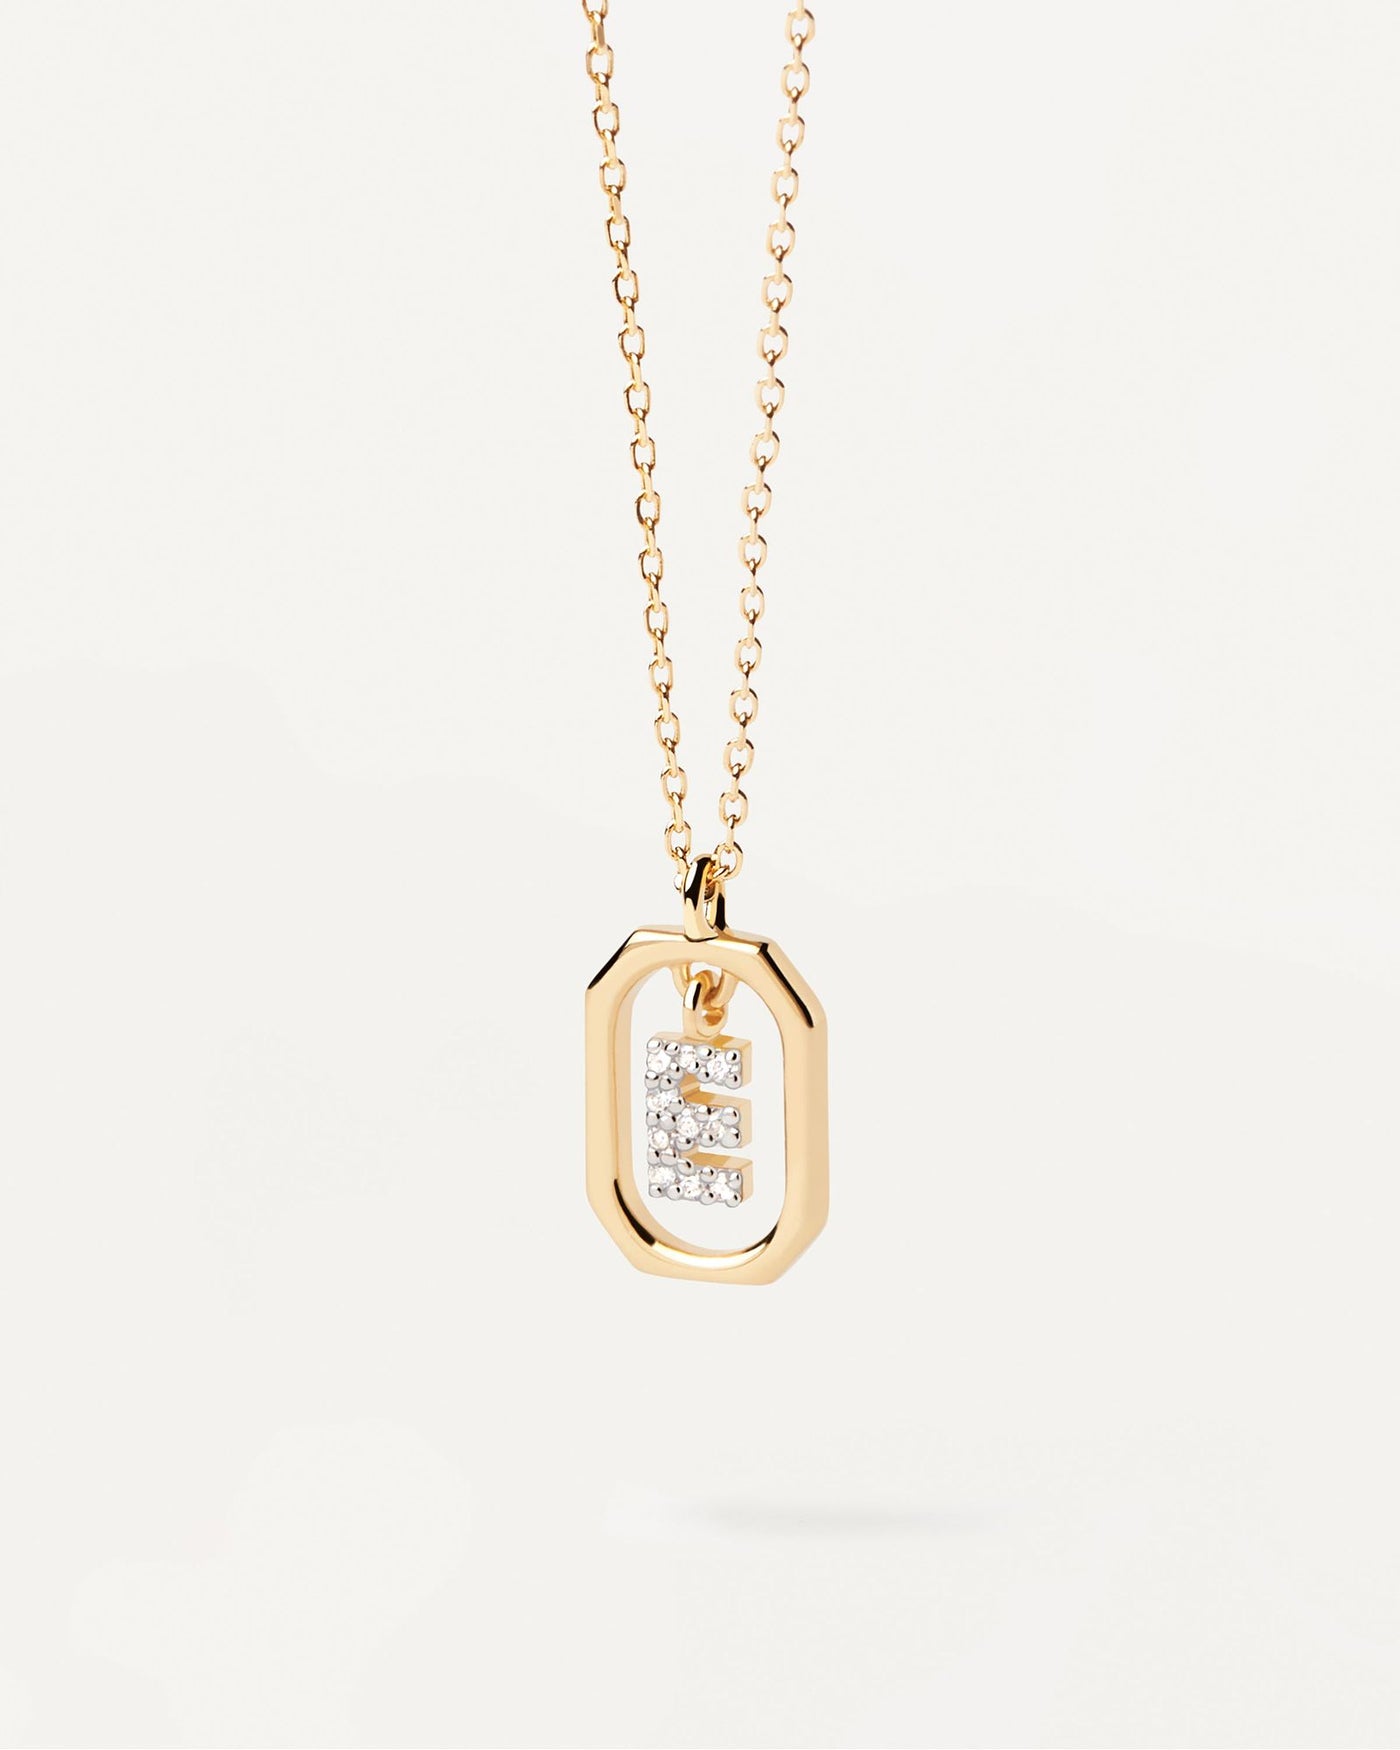 2024 Selection | Mini Letter E Necklace. Small initial E necklace in zirconia inside gold-plated silver octagonal pendant. Get the latest arrival from PDPAOLA. Place your order safely and get this Best Seller. Free Shipping.